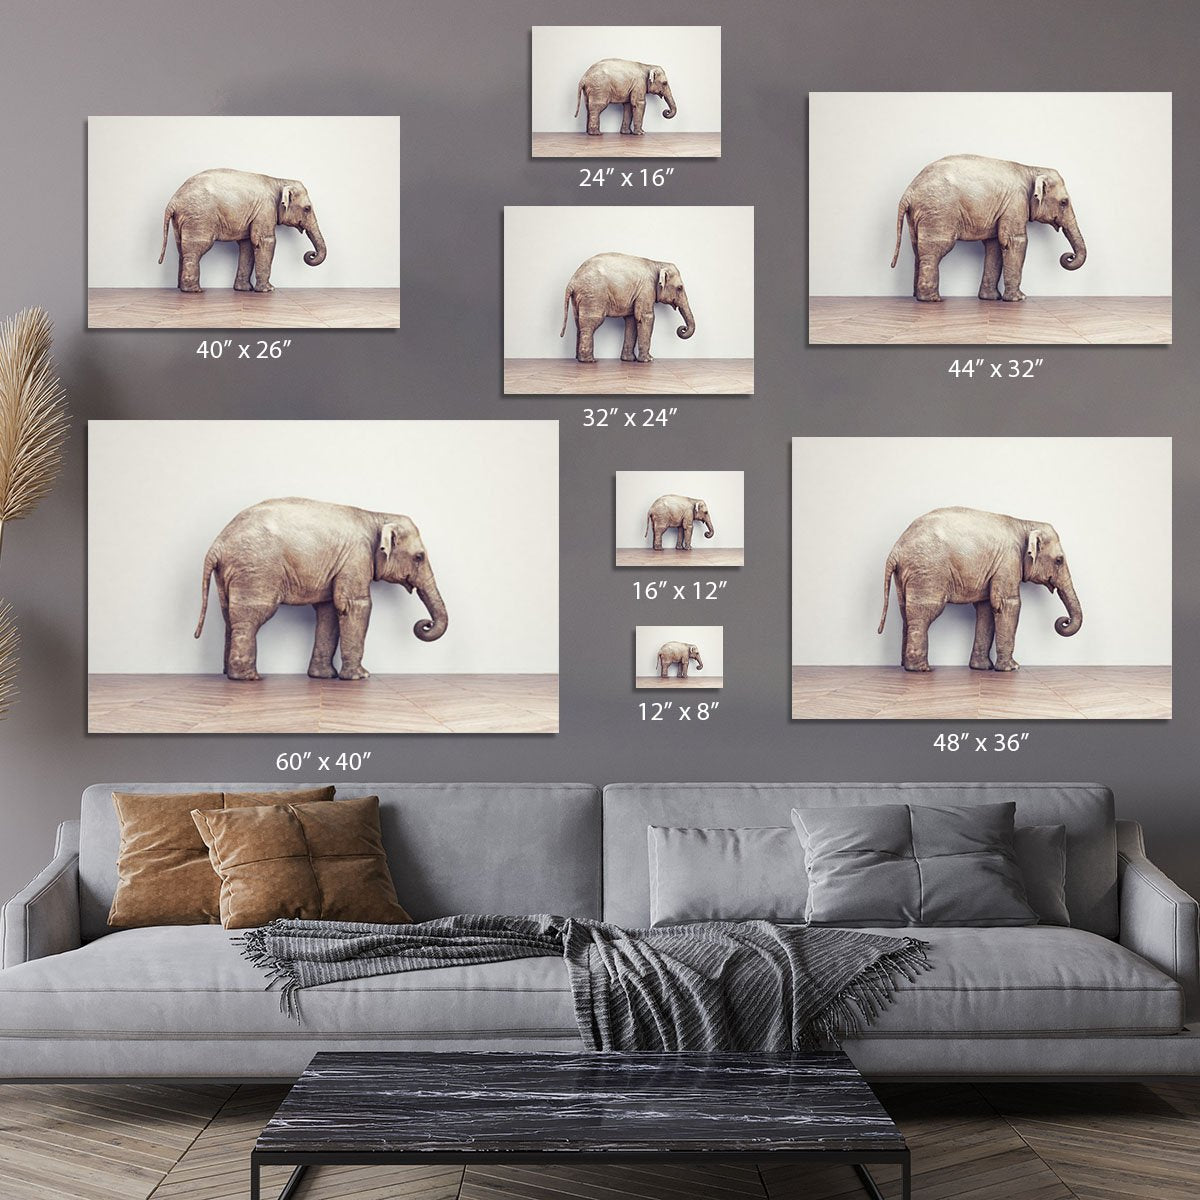 An elephant calm in the room near white wall. Creative concept Canvas Print or Poster